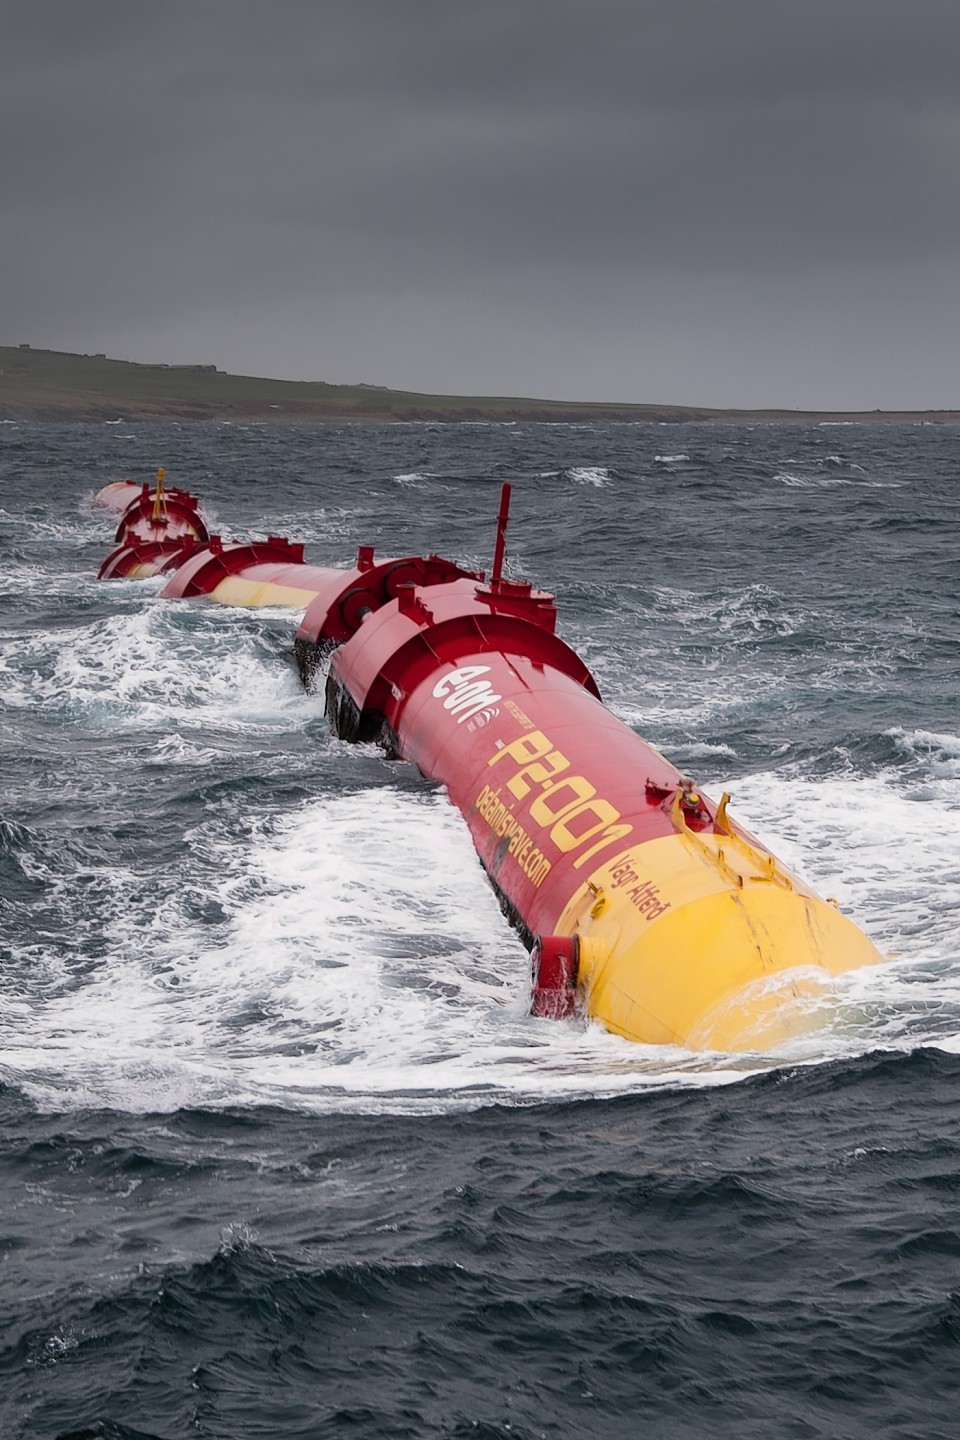 The body set up to help develop wave energy technology is to get £14.3million over next 13 months.